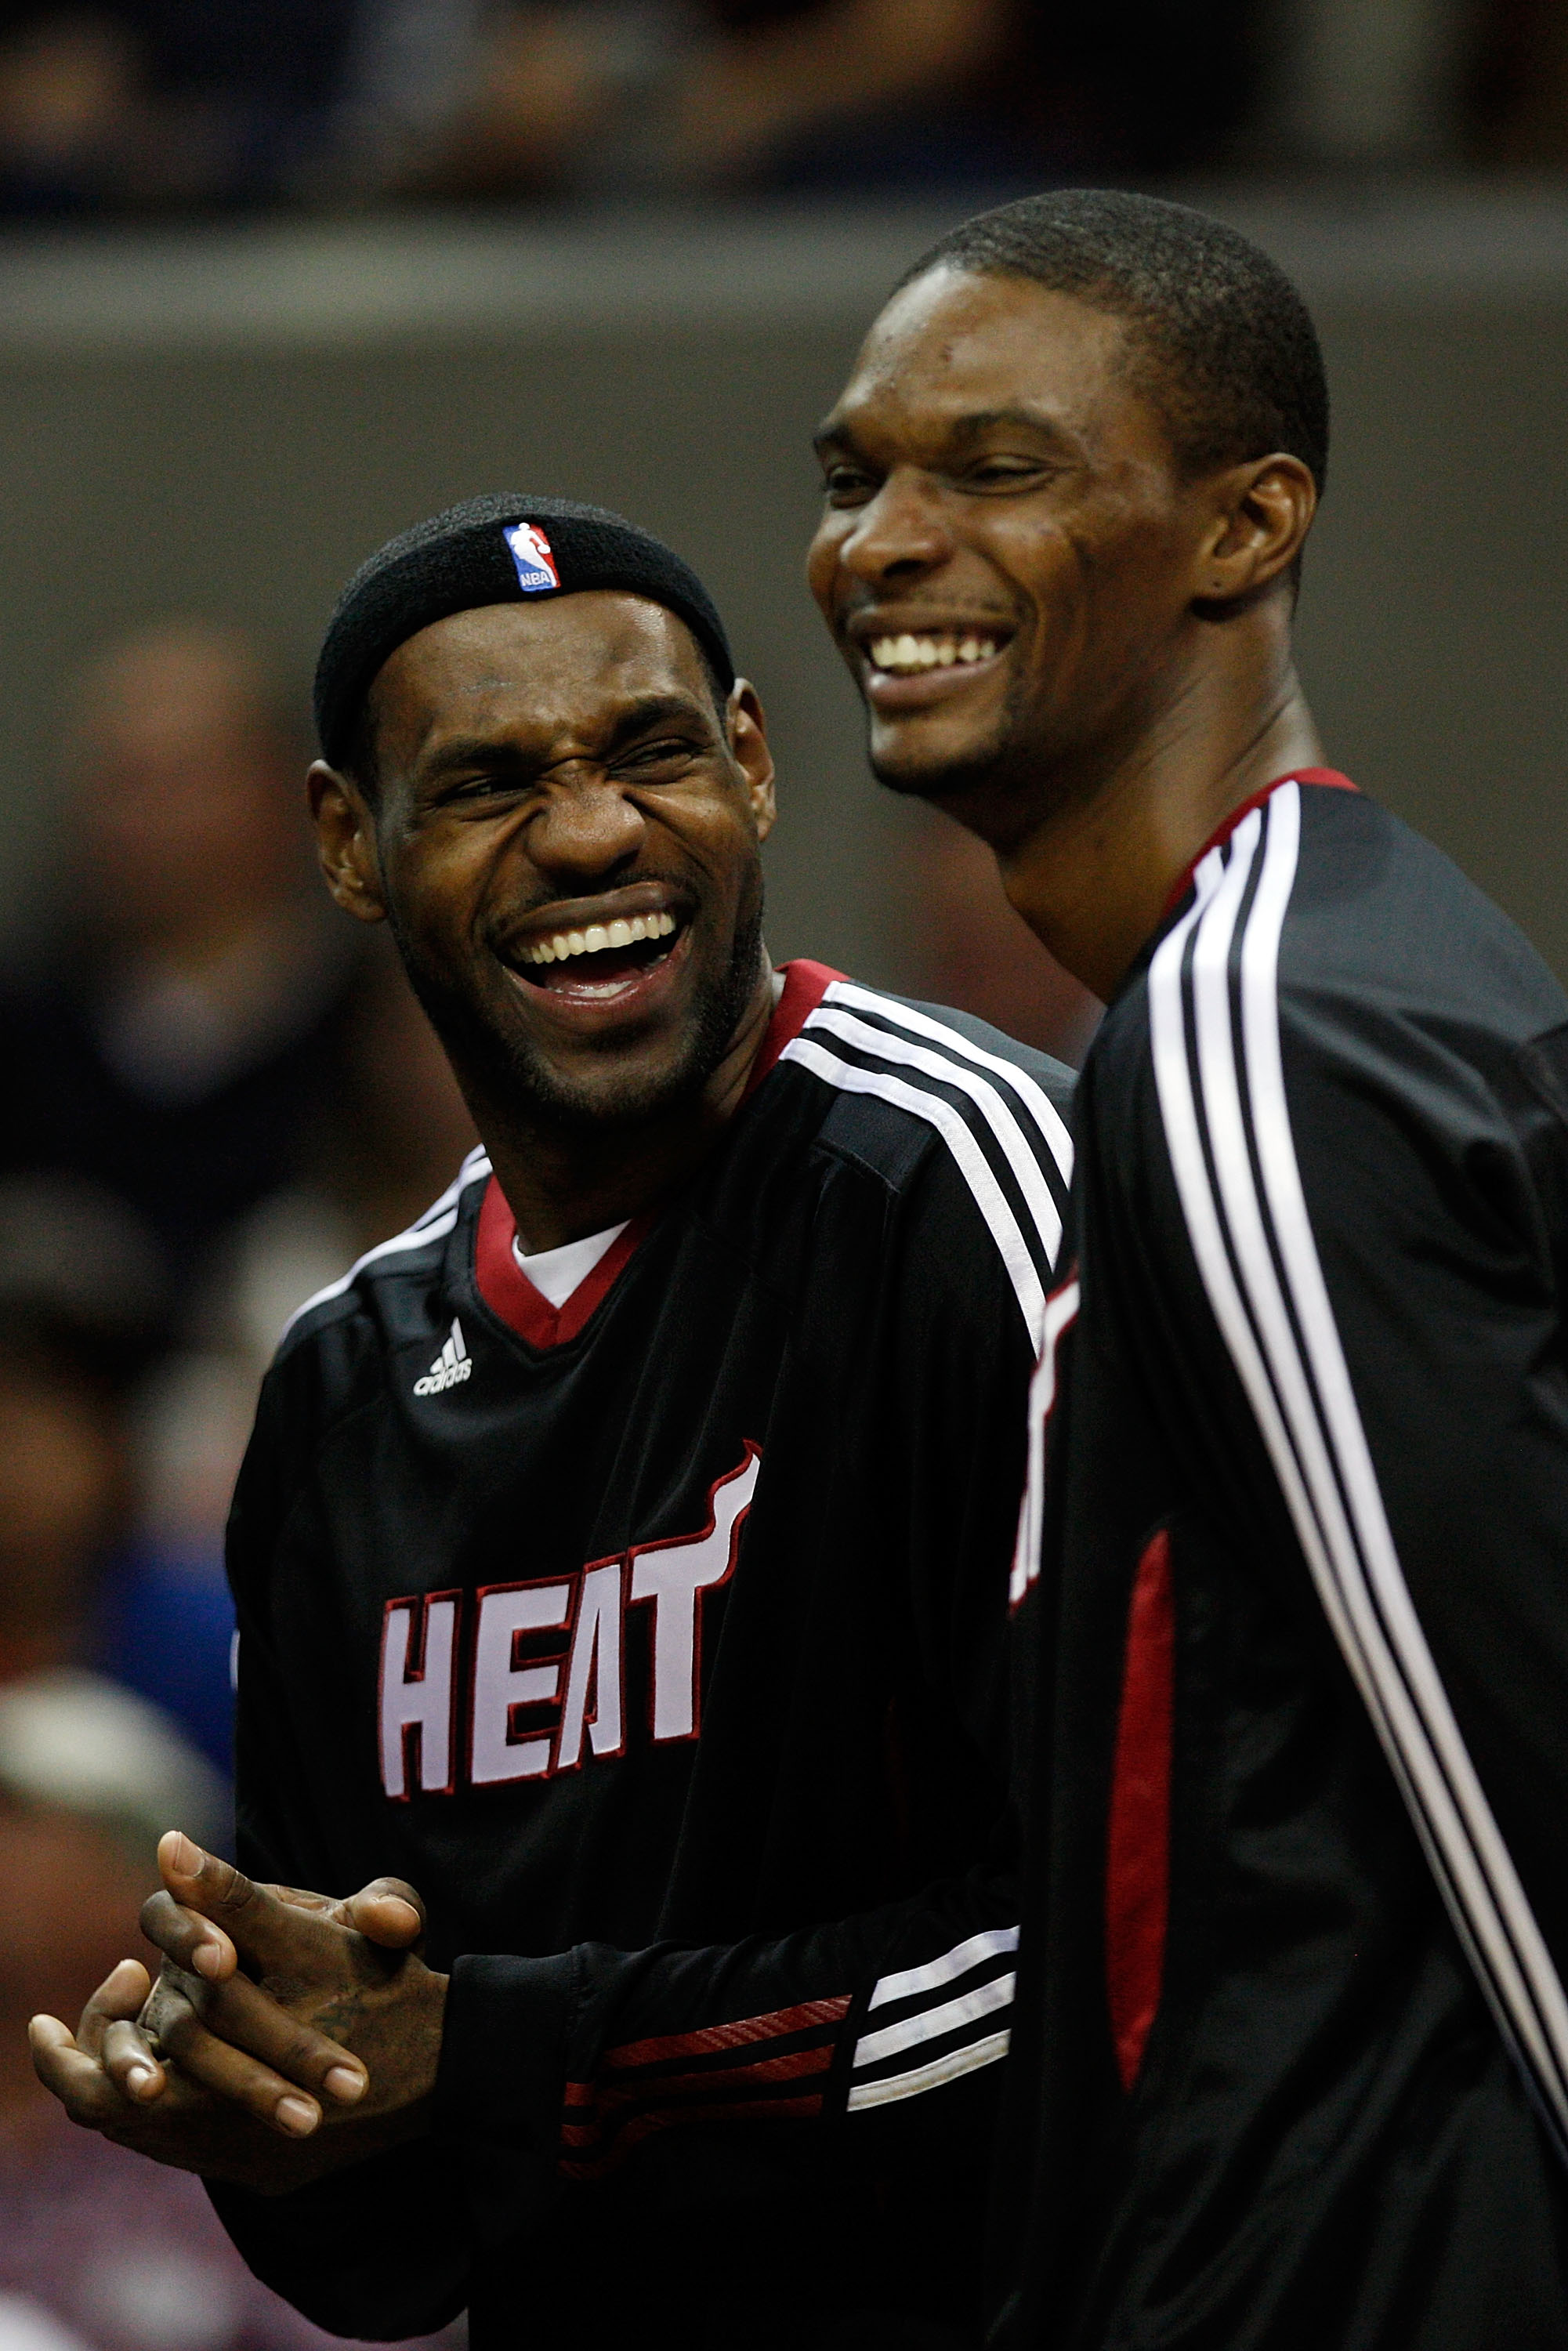 SAN ANTONIO - OCTOBER 09:  LeBron James #6 and Chris Bosh #1 of the Miami Heat talk during a timeout during the game against the San Antonio Spurs at the AT&T Center on October 9, 2010 in San Antonio, Texas.  NOTE TO USER: User expressly acknowledges and